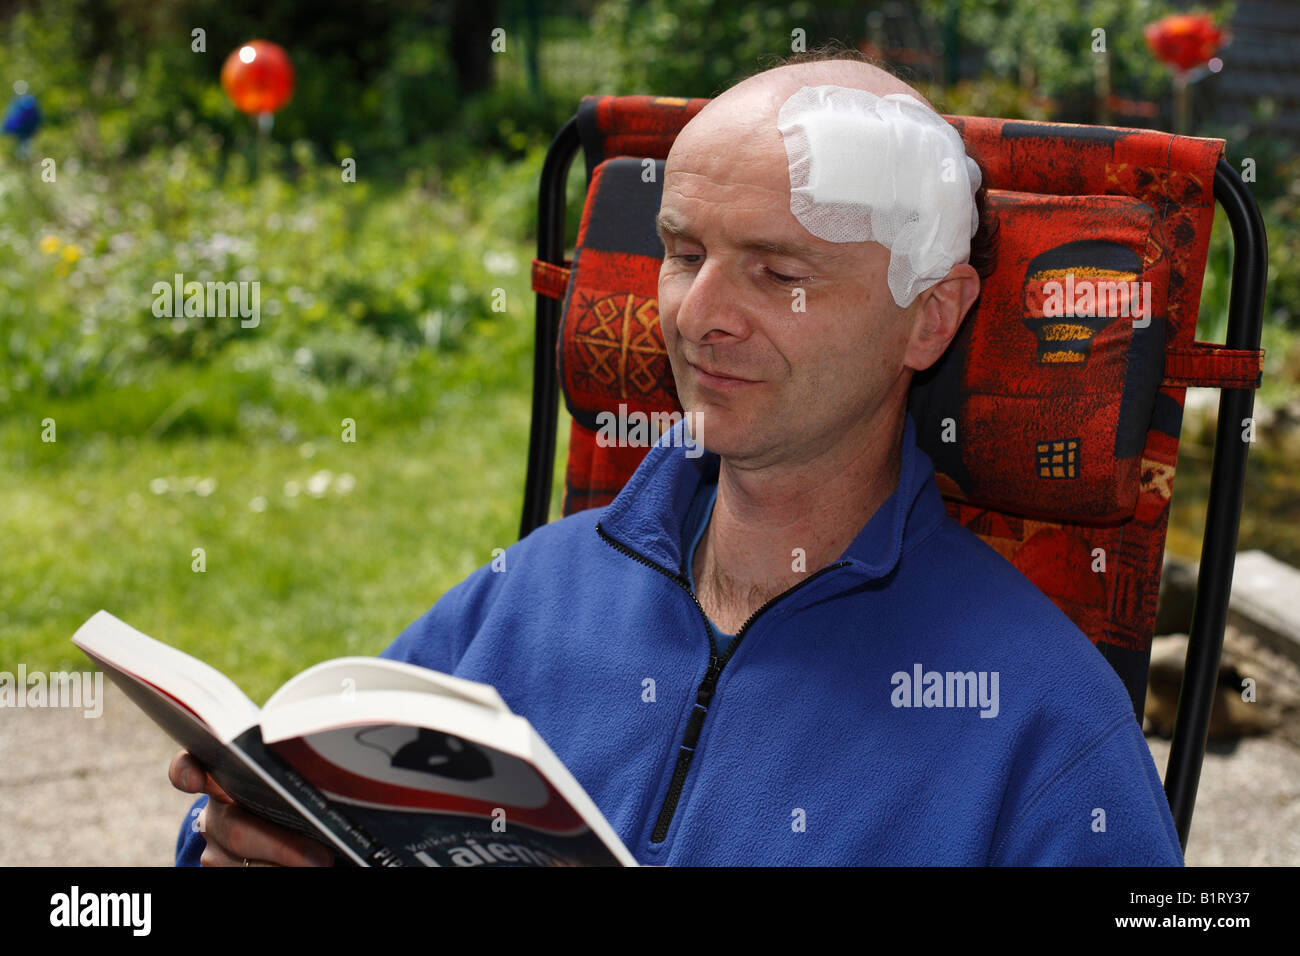 Man, 45, with an adhesive bandage on his head, sitting in a garden chair reading a book, Geretsried, Bavaria, Germany, Europe Stock Photo